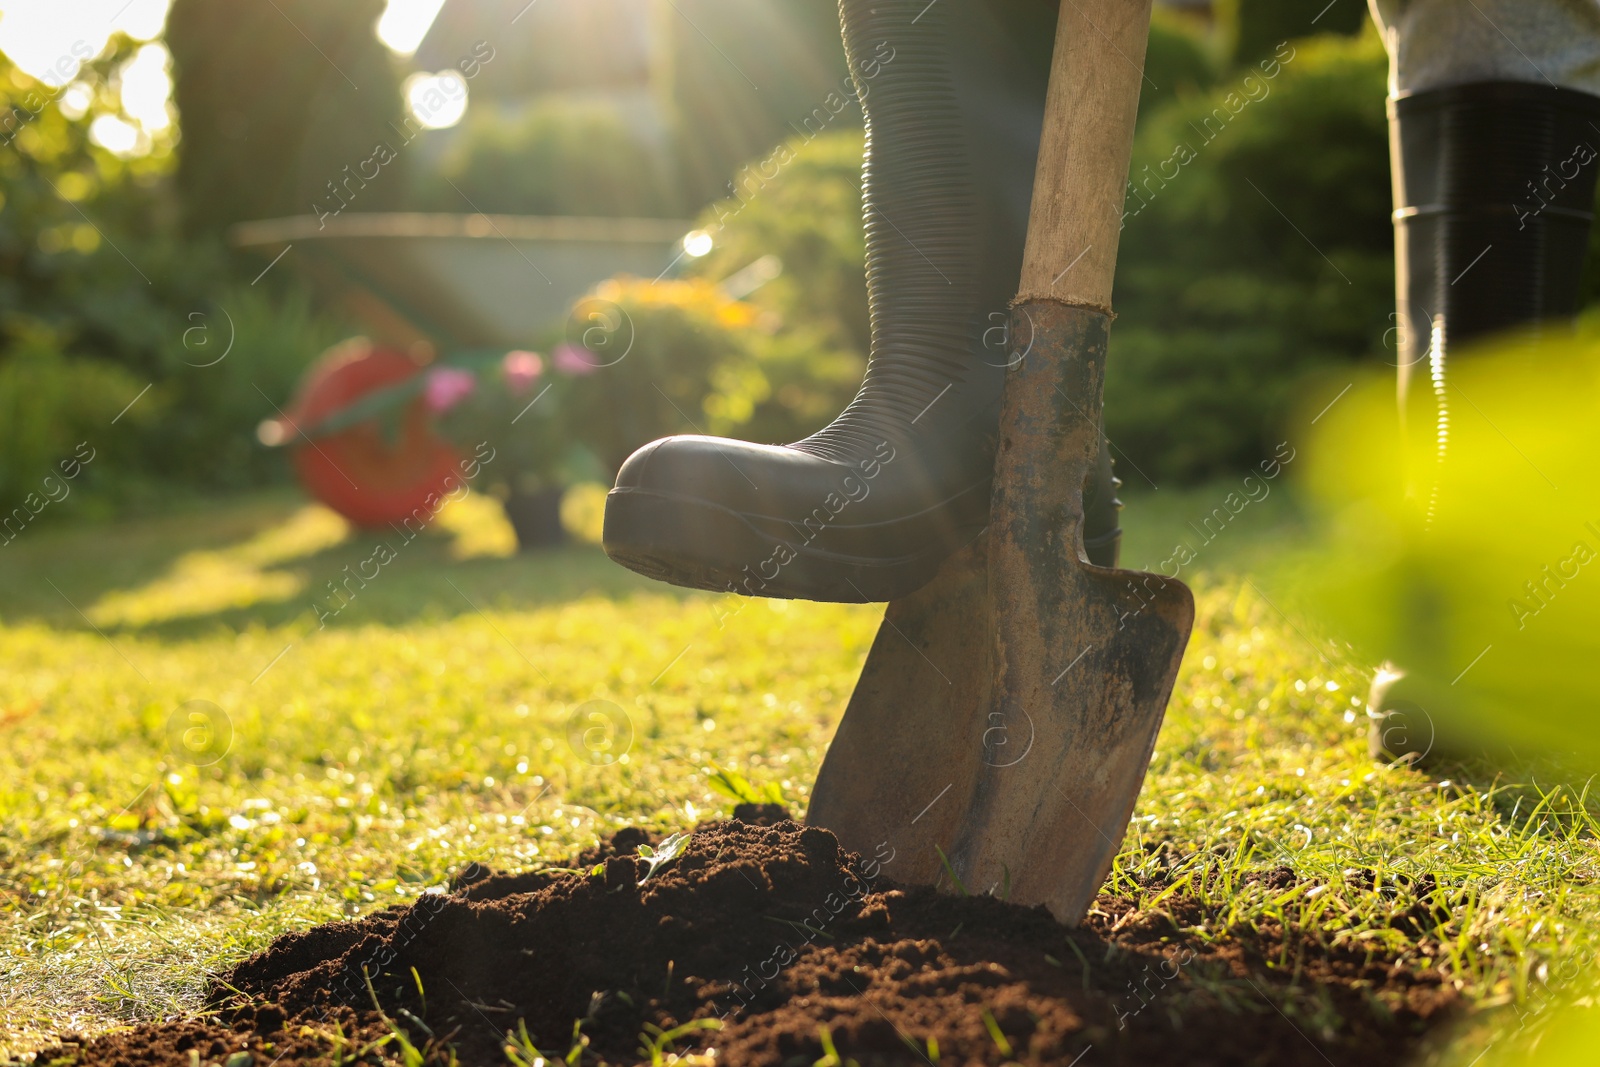 Photo of Man digging soil with shovel outdoors on sunny day, closeup. Gardening time